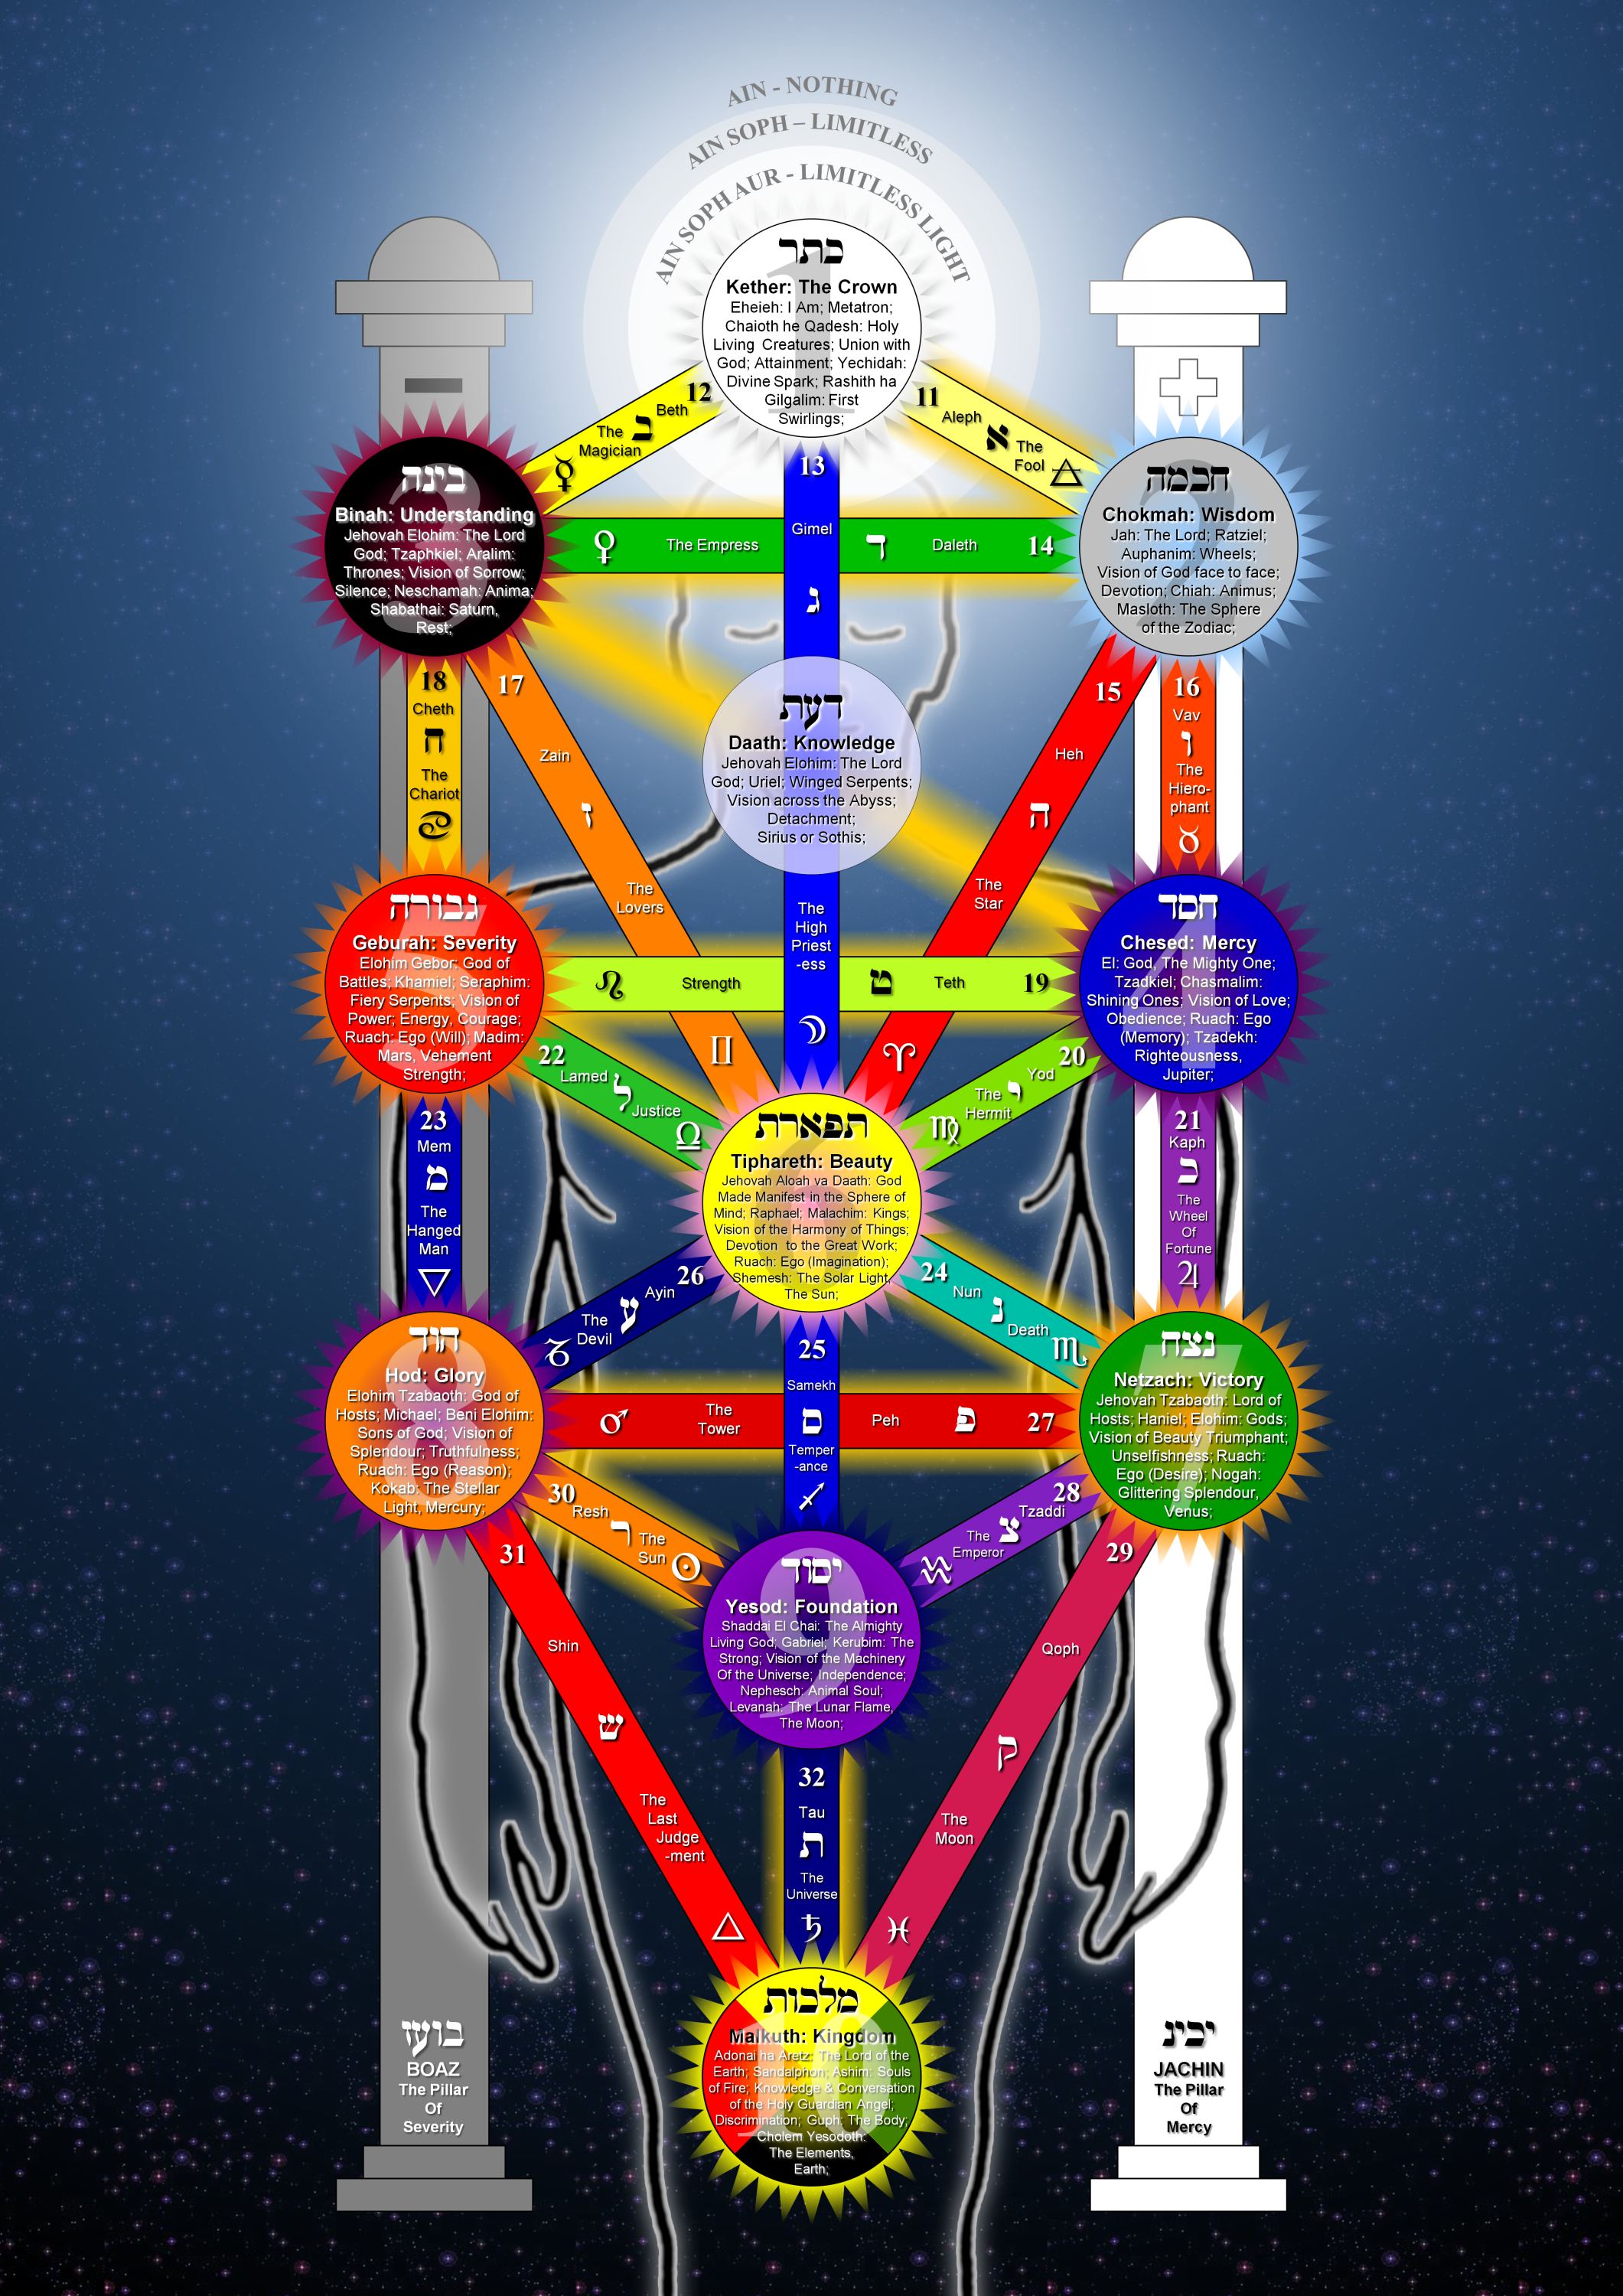 Tree_of_Life_2009_large.png